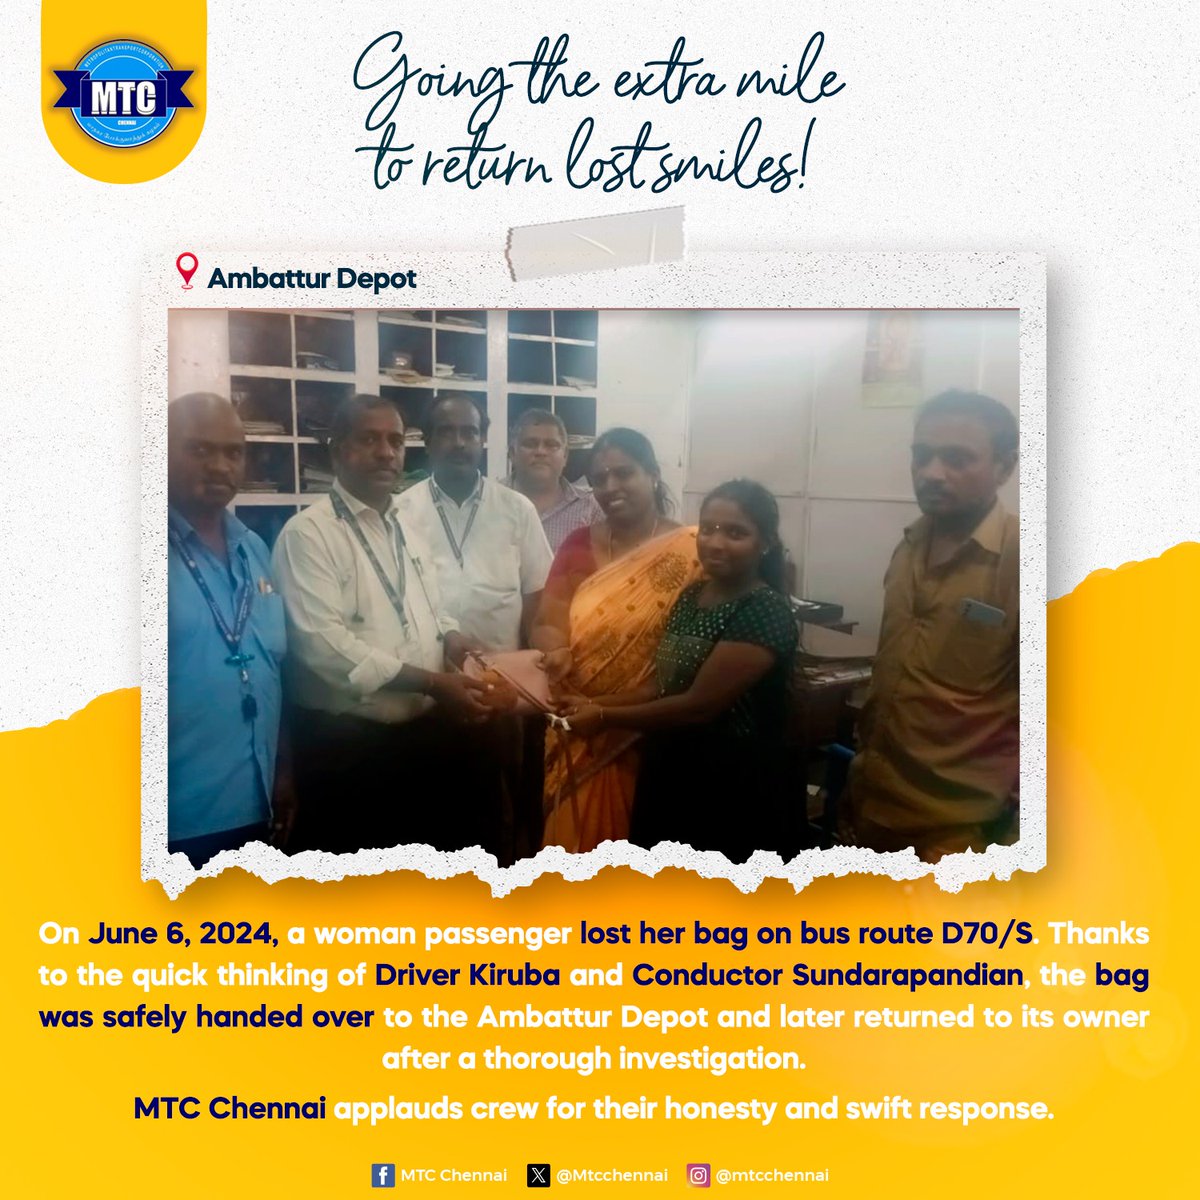 On June 6, 2024, a woman passenger lost her bag on bus route D70/S. Thanks to the quick thinking of Driver Kiruba and Conductor Sundarapandian, the bag was safely handed over to the Ambattur Depot and later returned to its owner after a thorough investigation.

#MTCChennai…